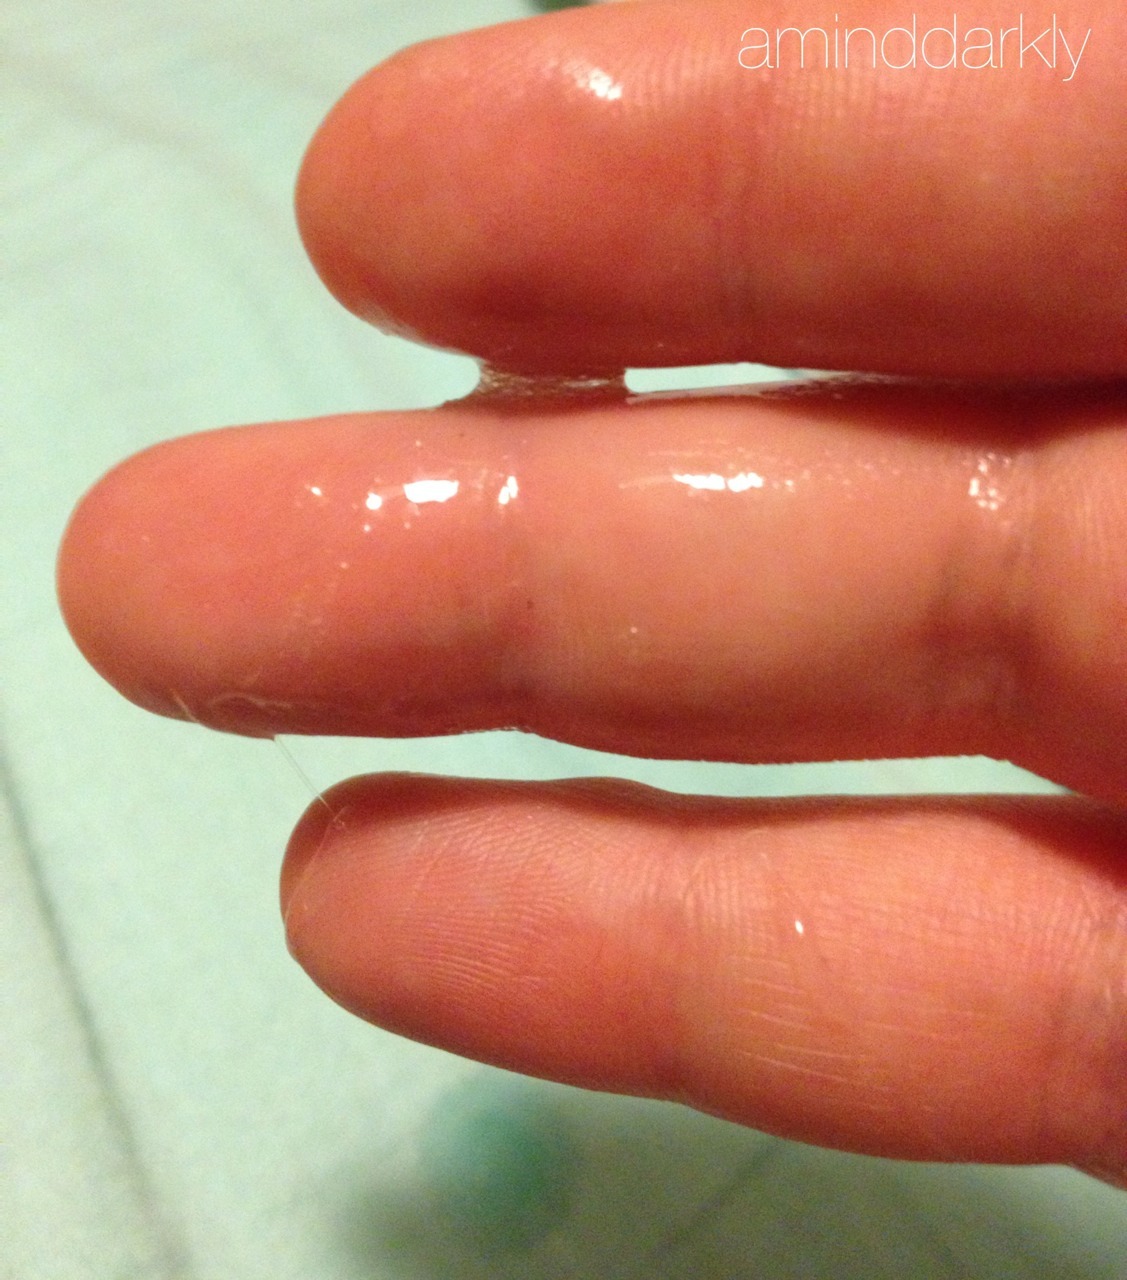 aminddarkly:  Daddy: “Lick those dirty fingers clean. One at a time. Slowly. Savor